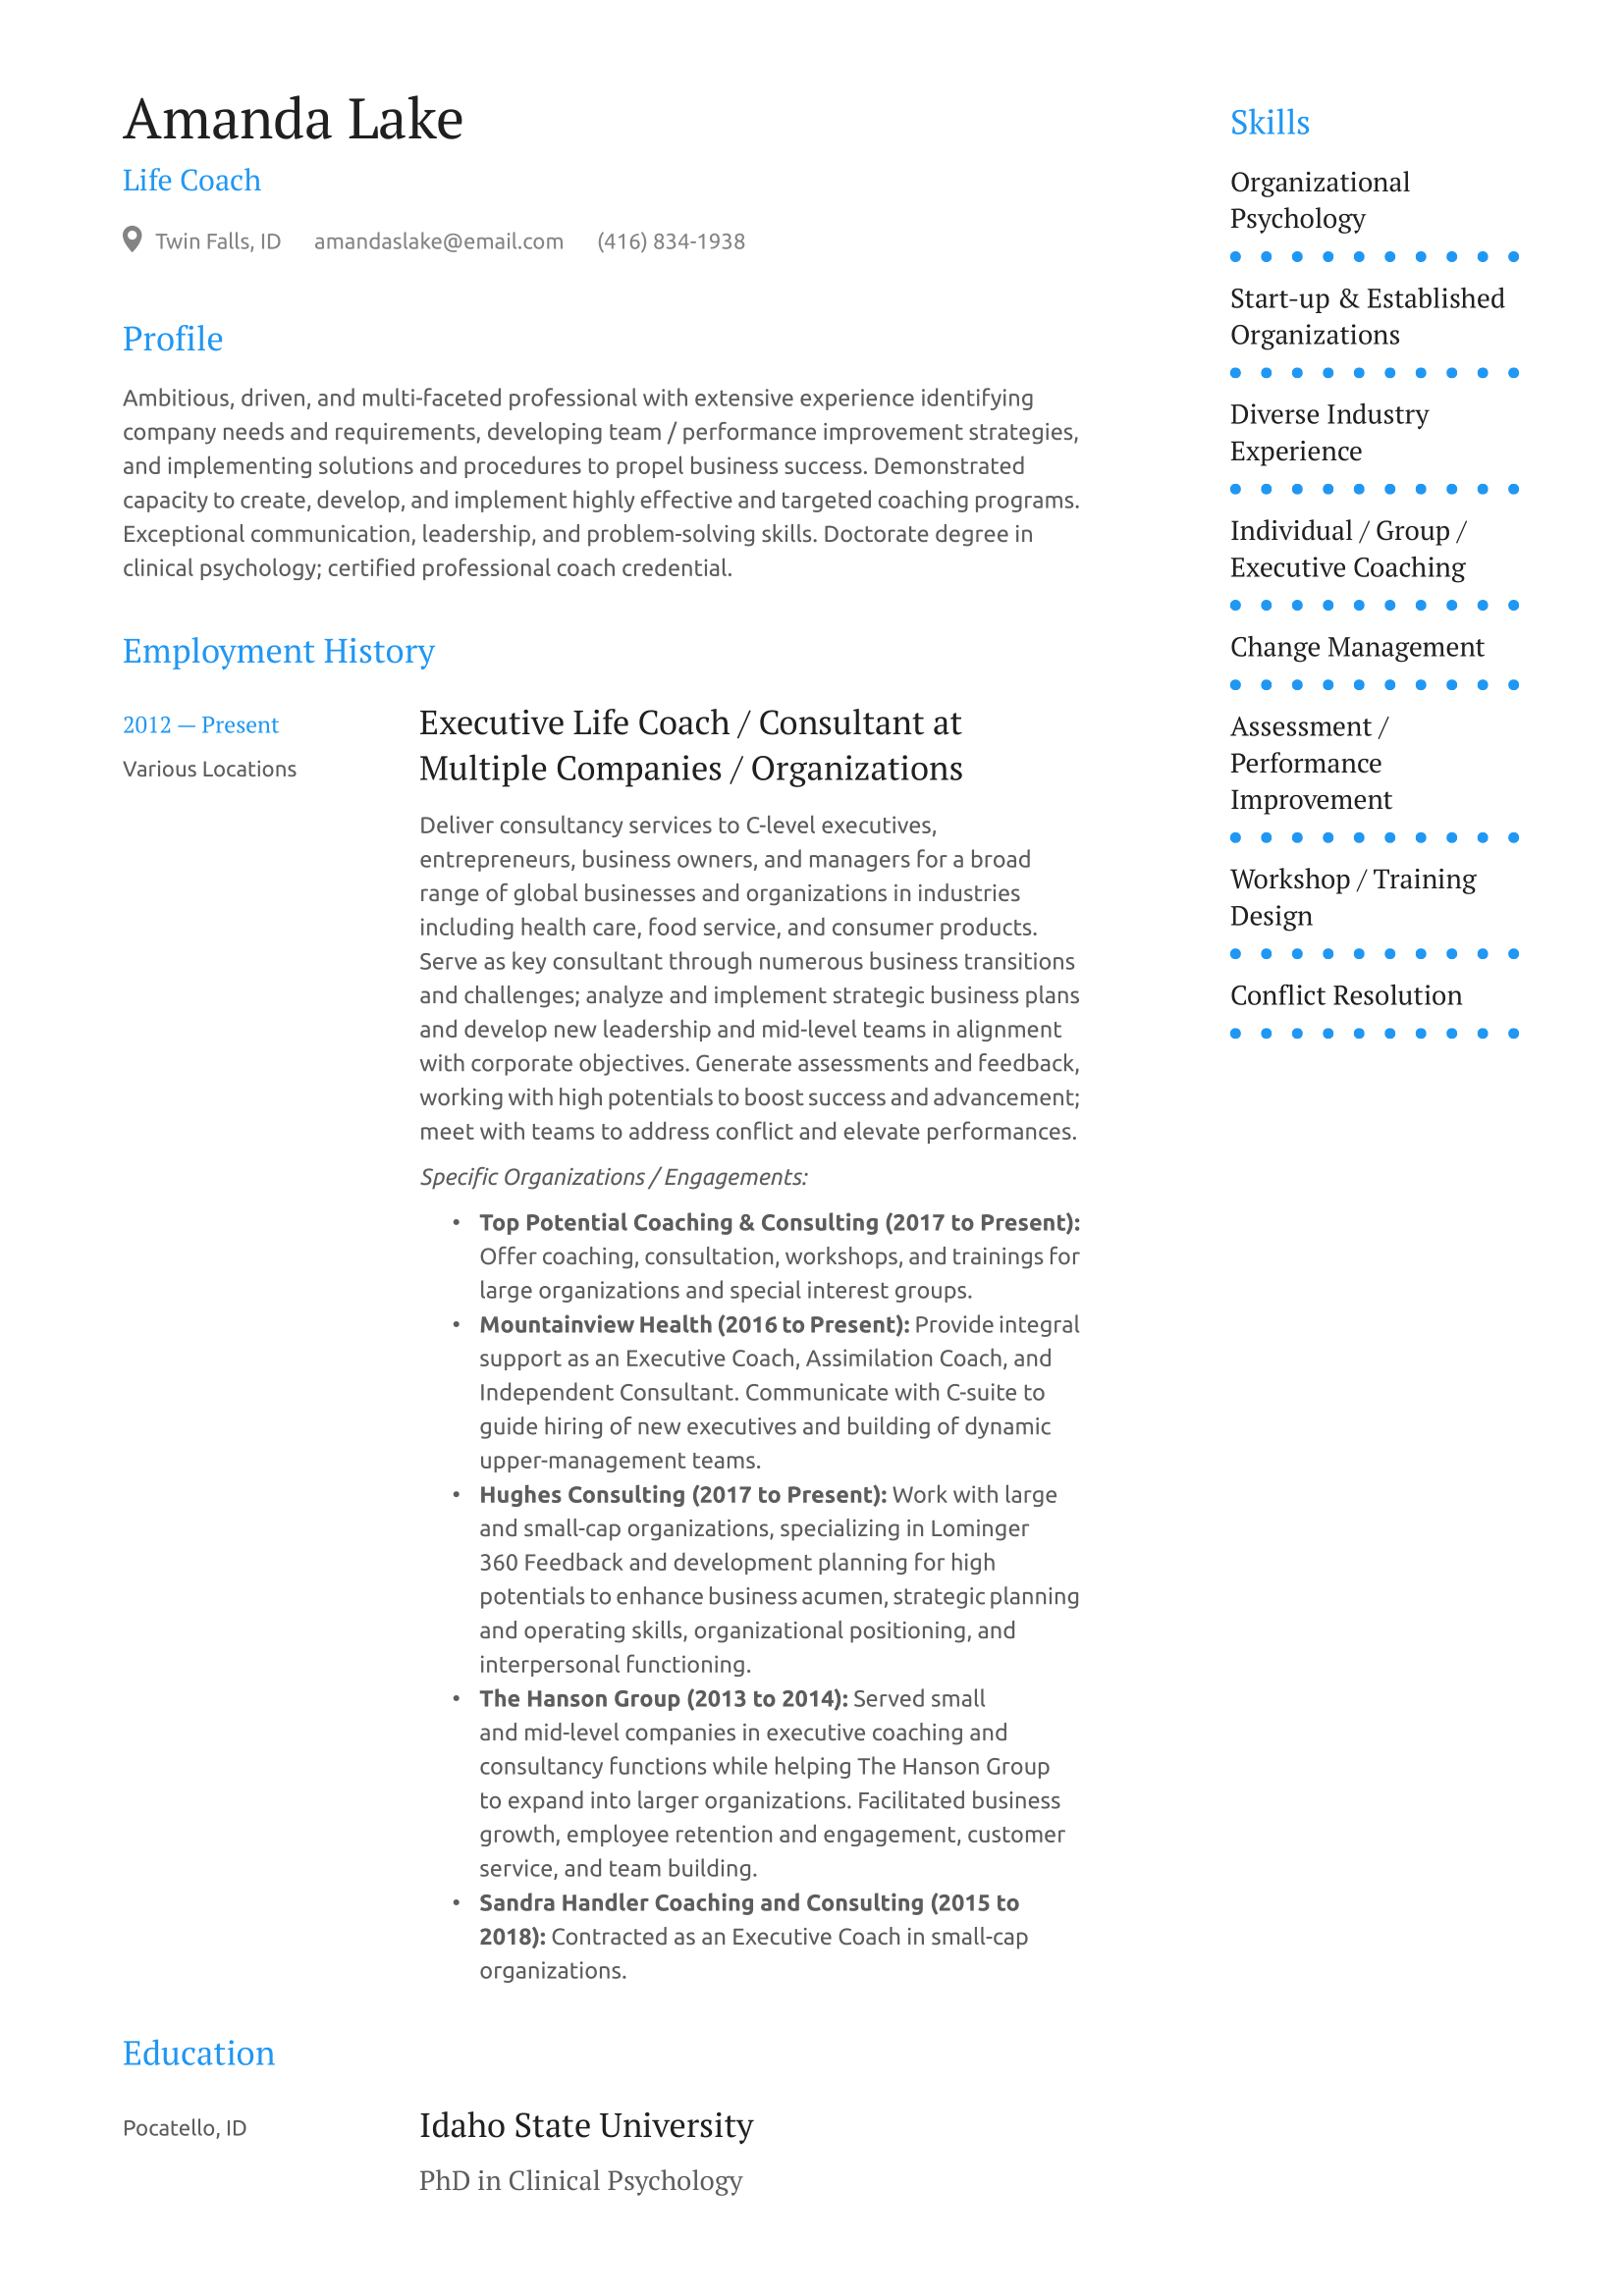 Life Coach Resume Example and Writing Guide